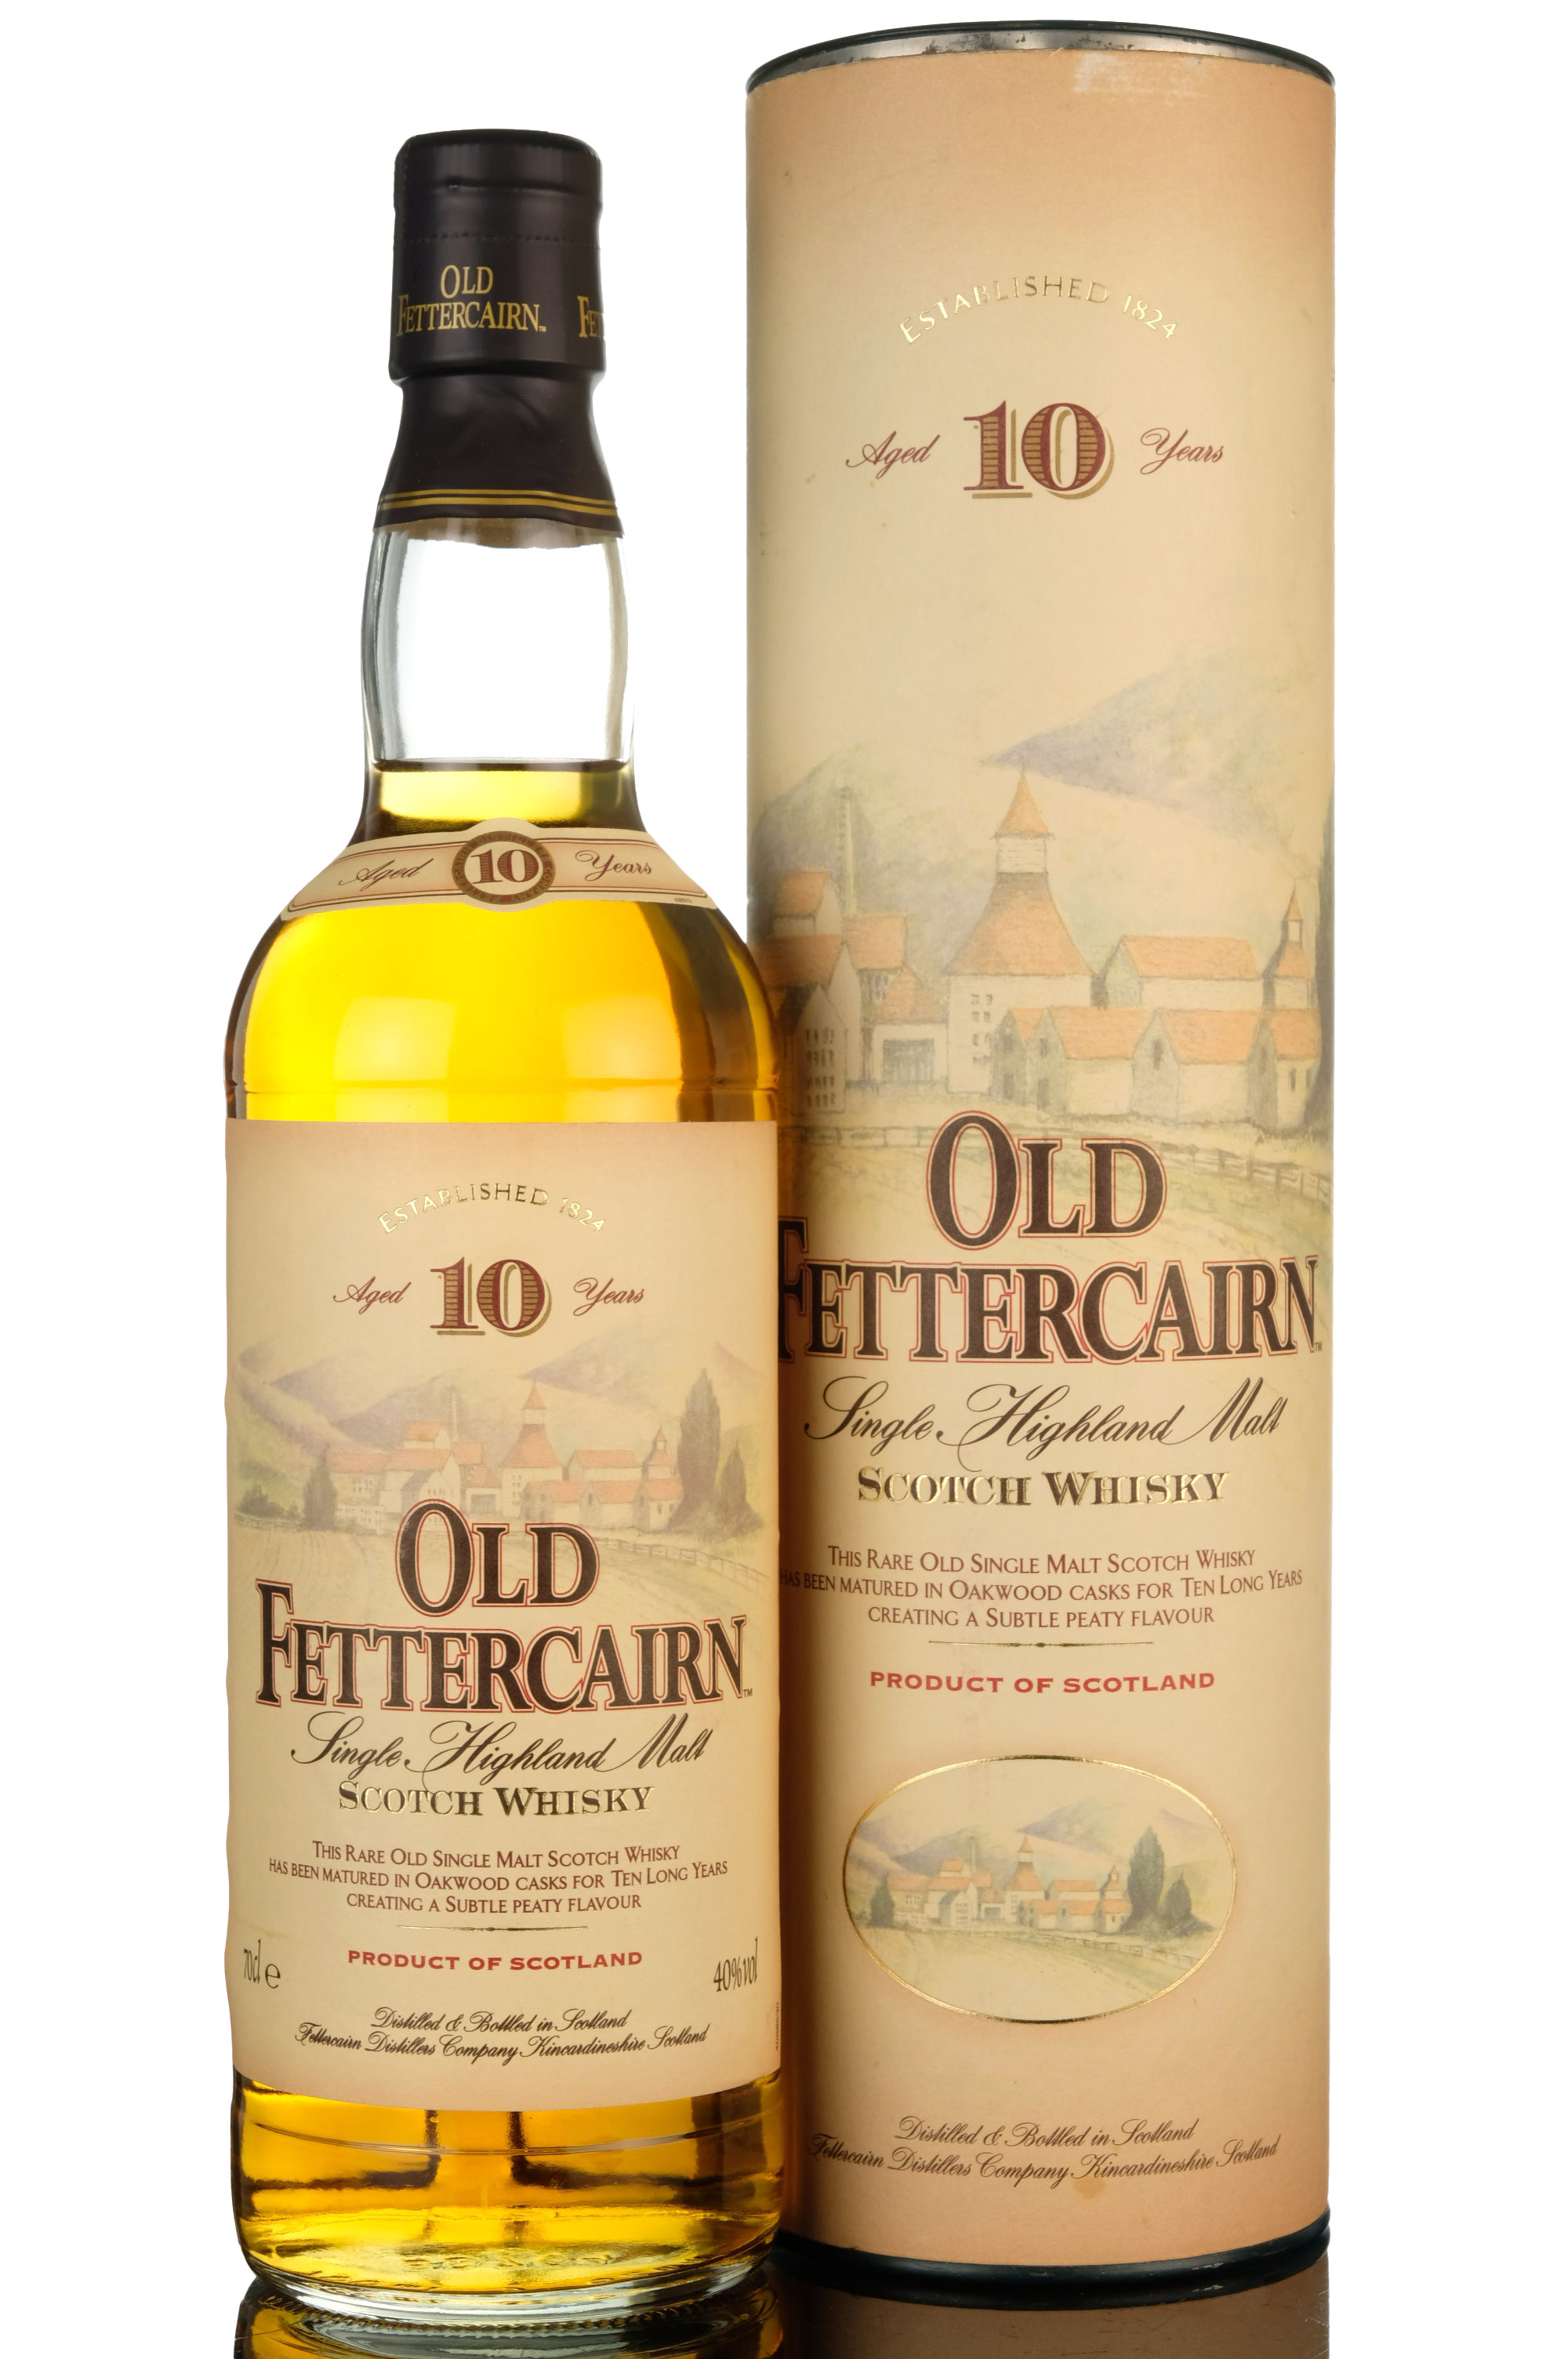 Old Fettercairn 10 Year Old - Circa 2000